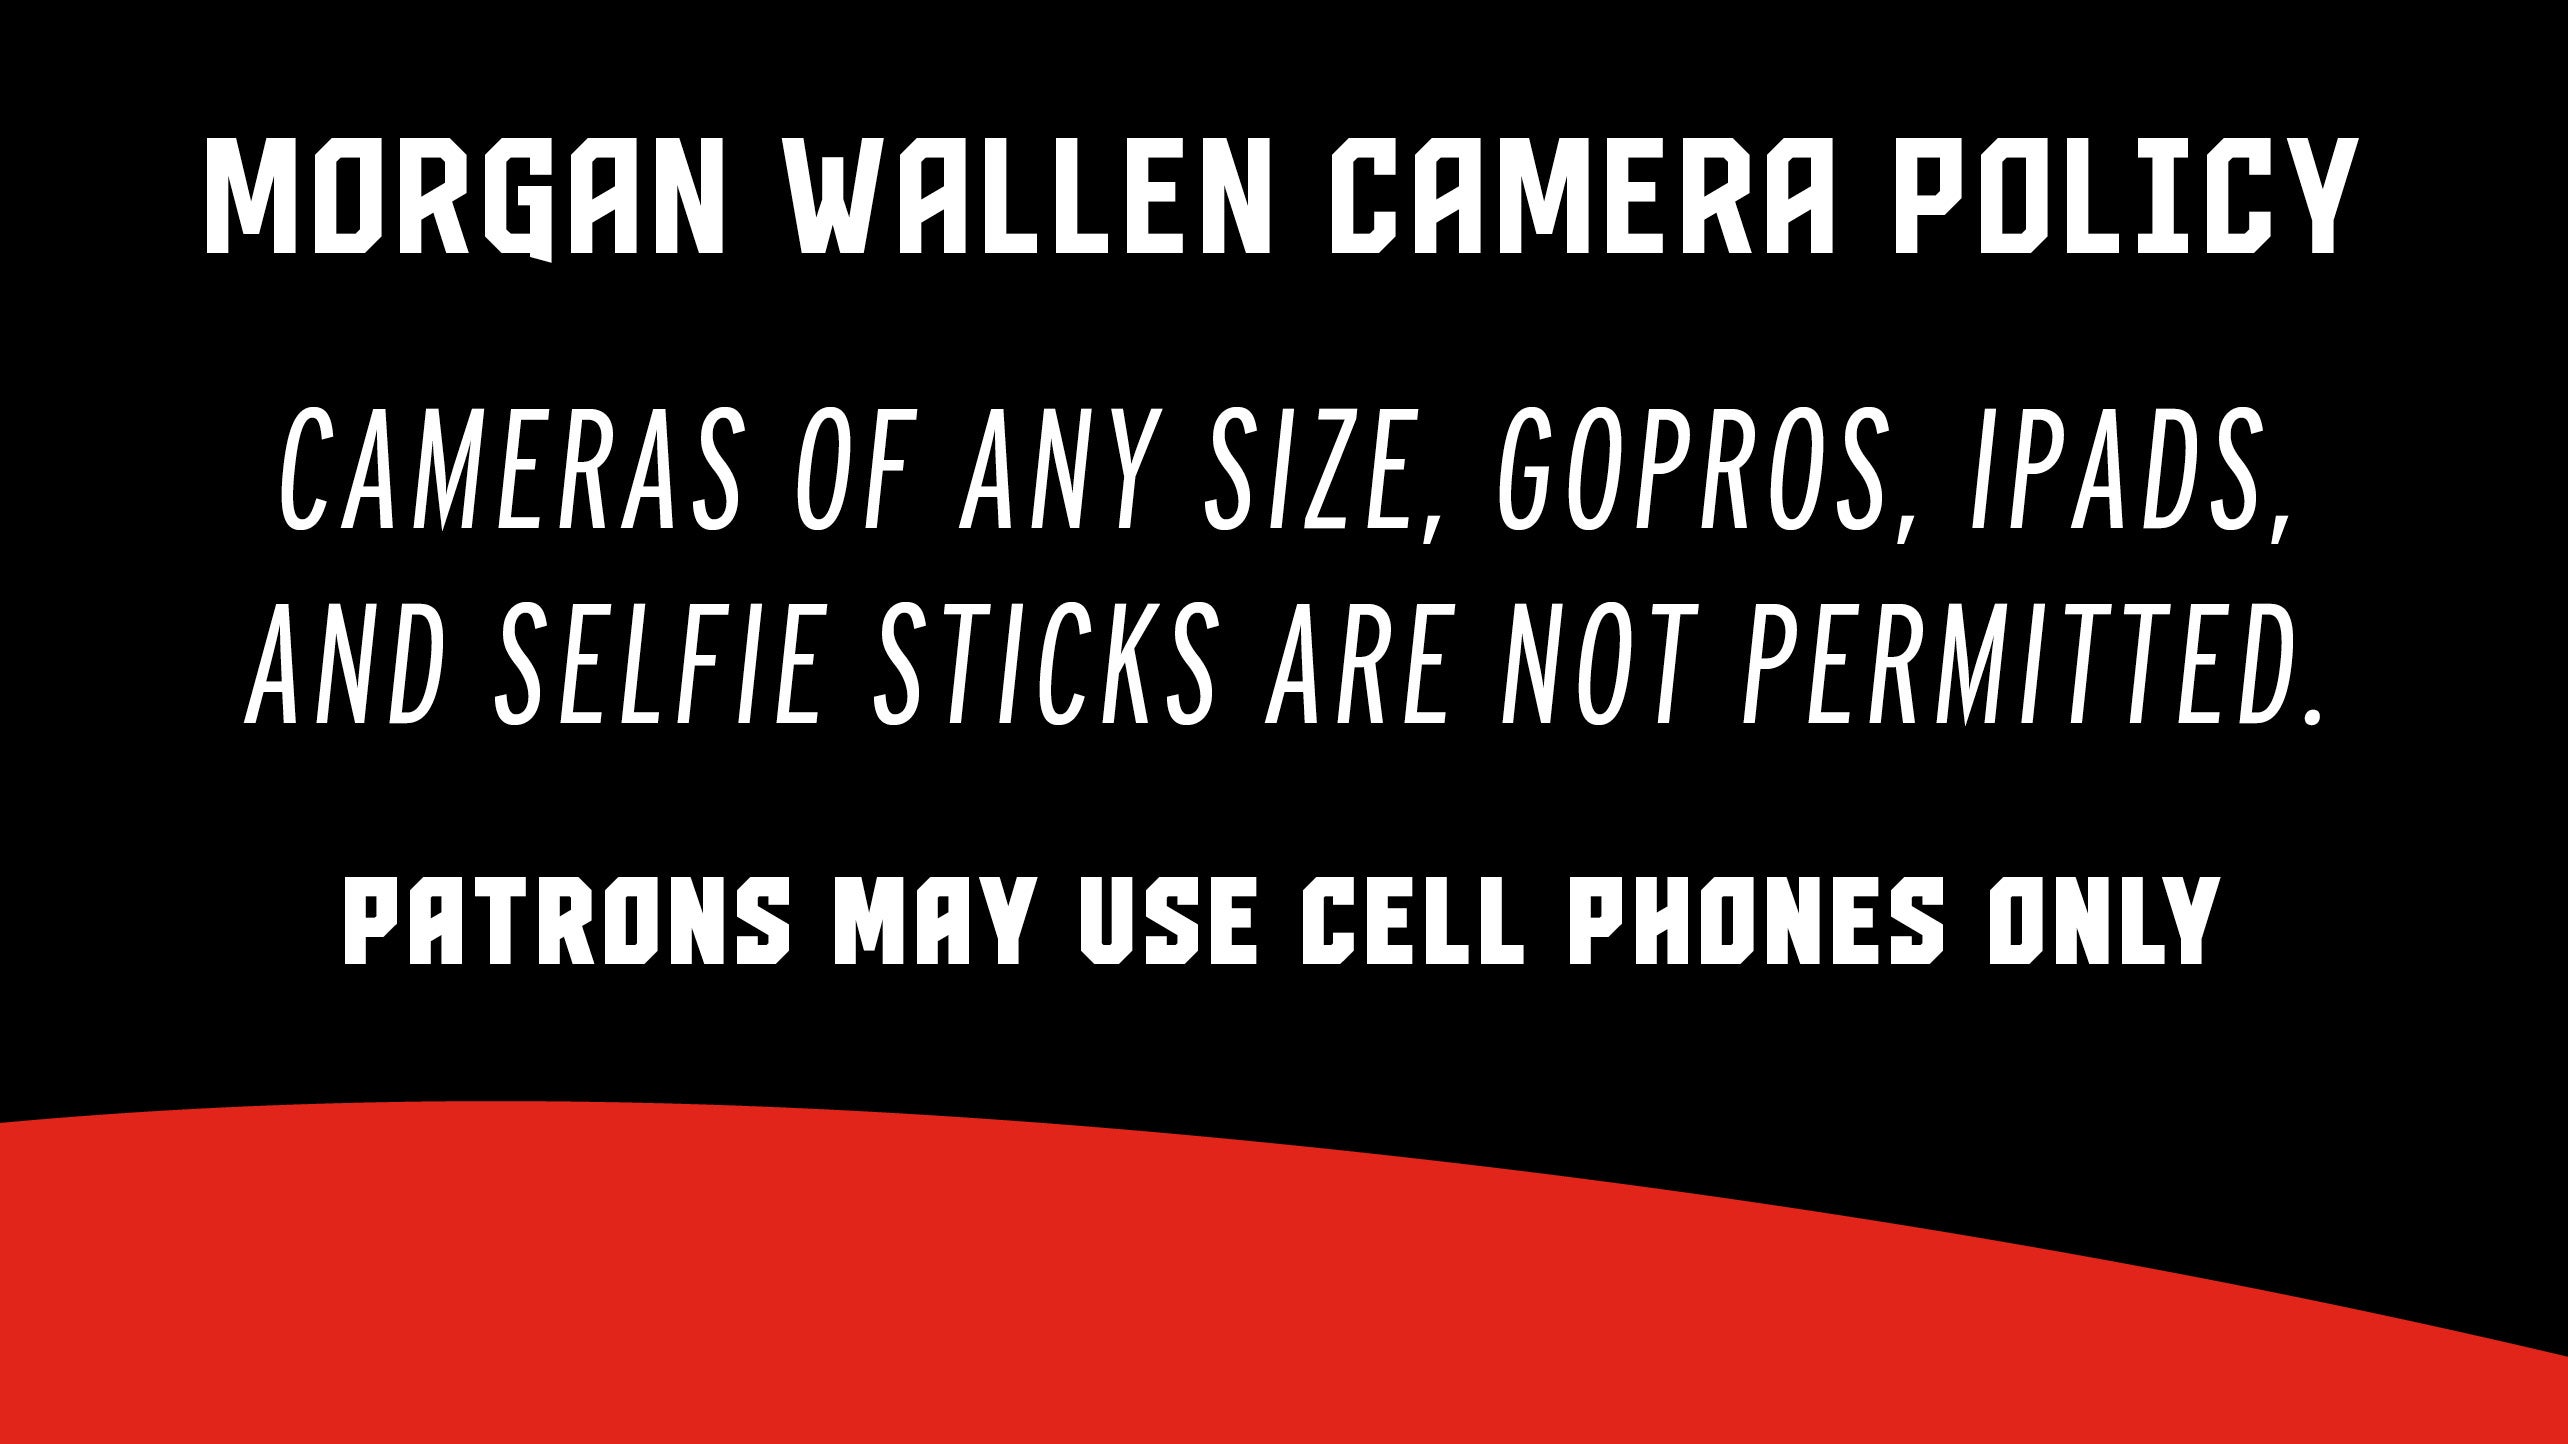 camera policy, cell phones only